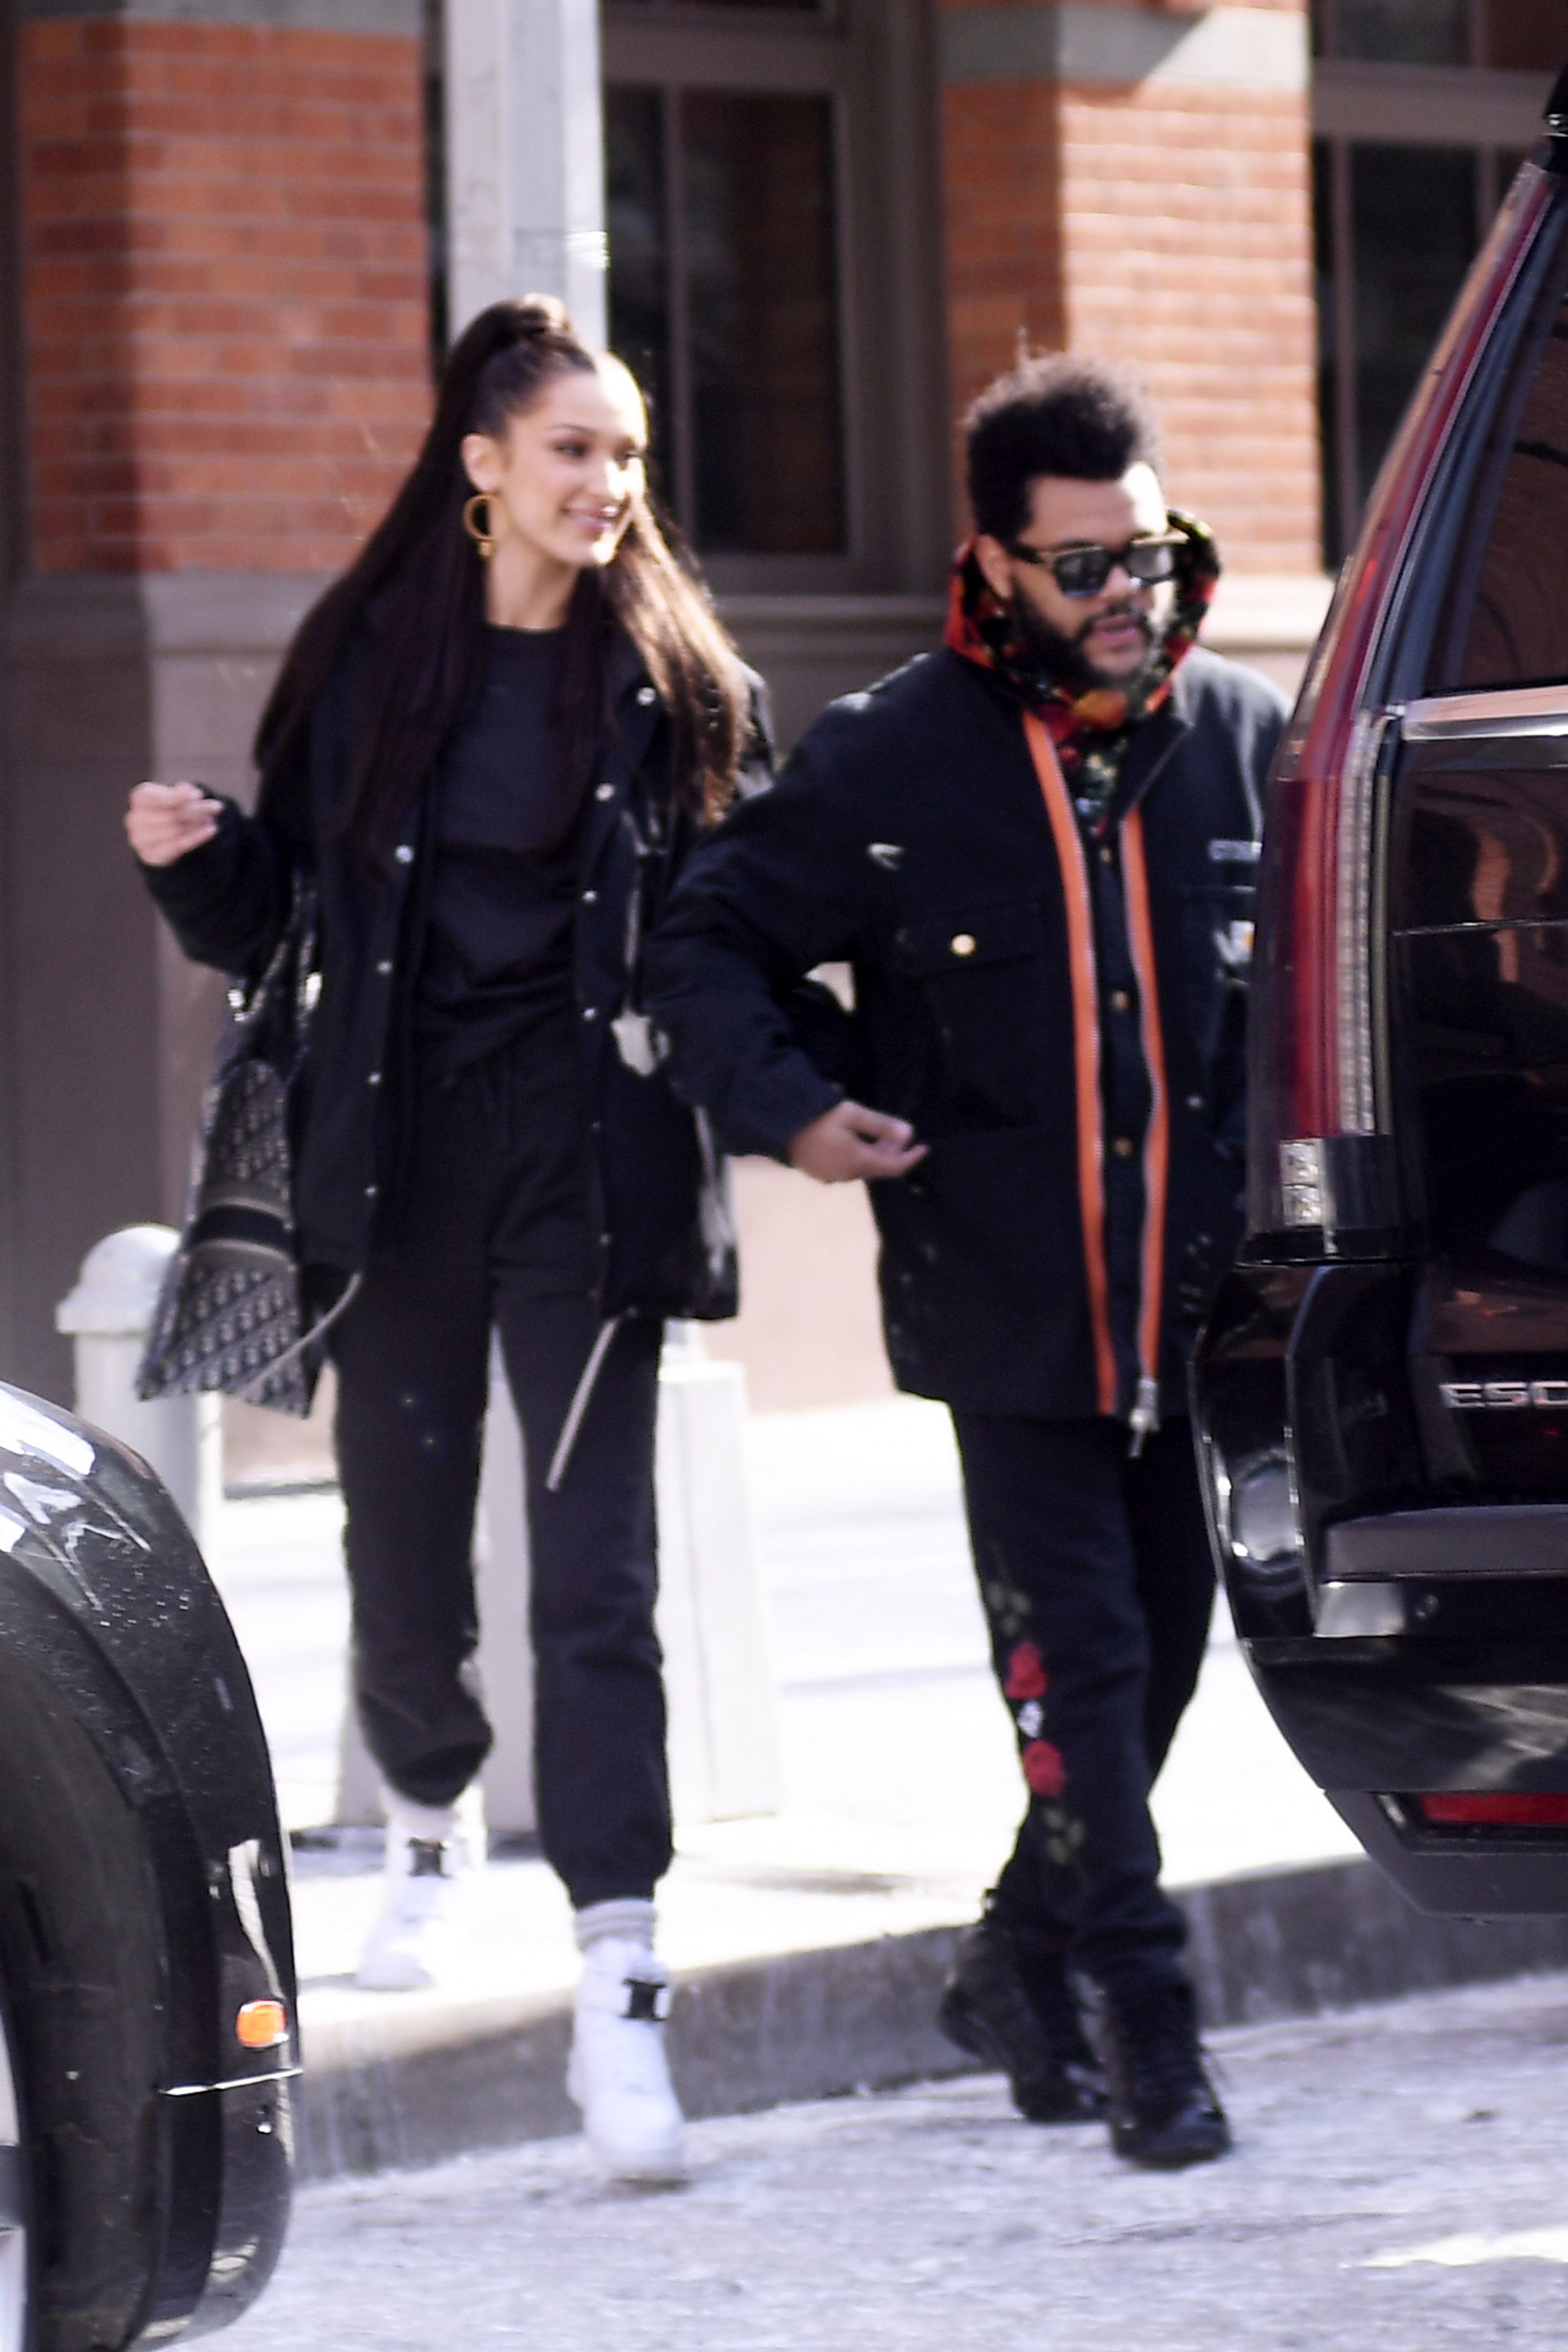 Bella Hadid & The Weeknd Are All Smiles While Strolling in NYC!: Photo  4172772, Bella Hadid, The Weeknd Photos